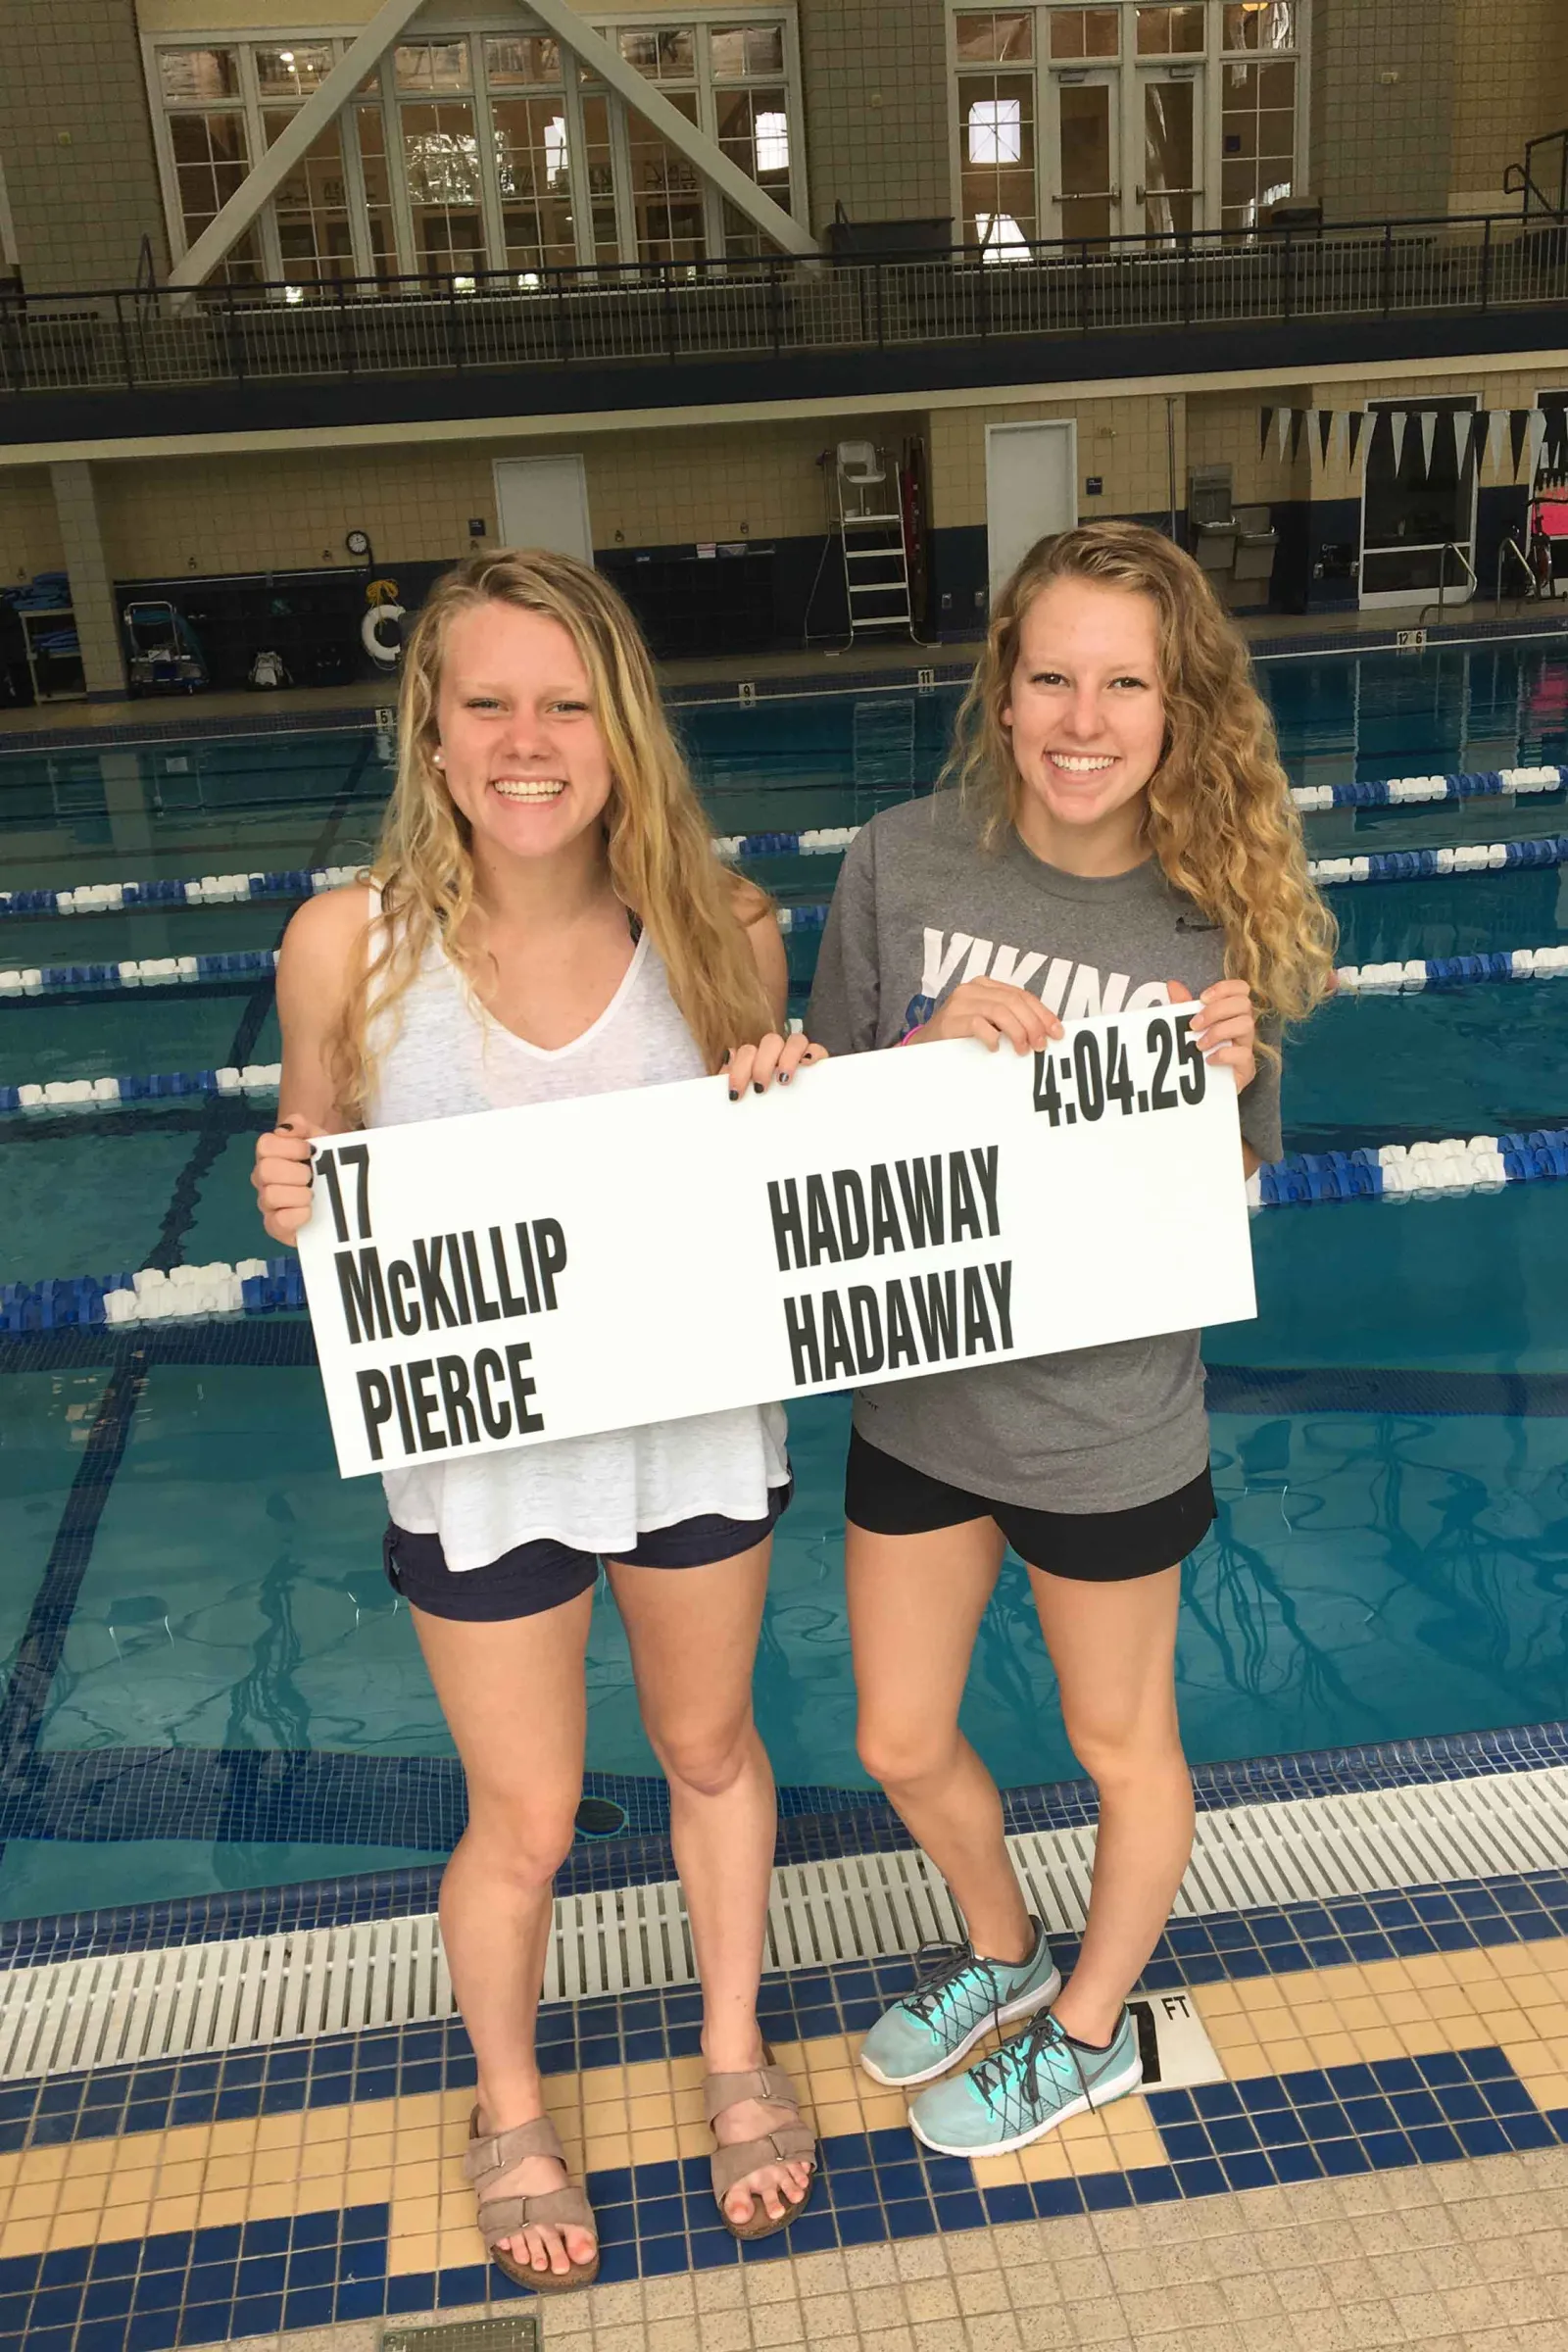 Two students stand in front of a pool holding a sign that reads &quot;17 McKillip Hadaway Pierce Hadaway 4:04.25&quot;